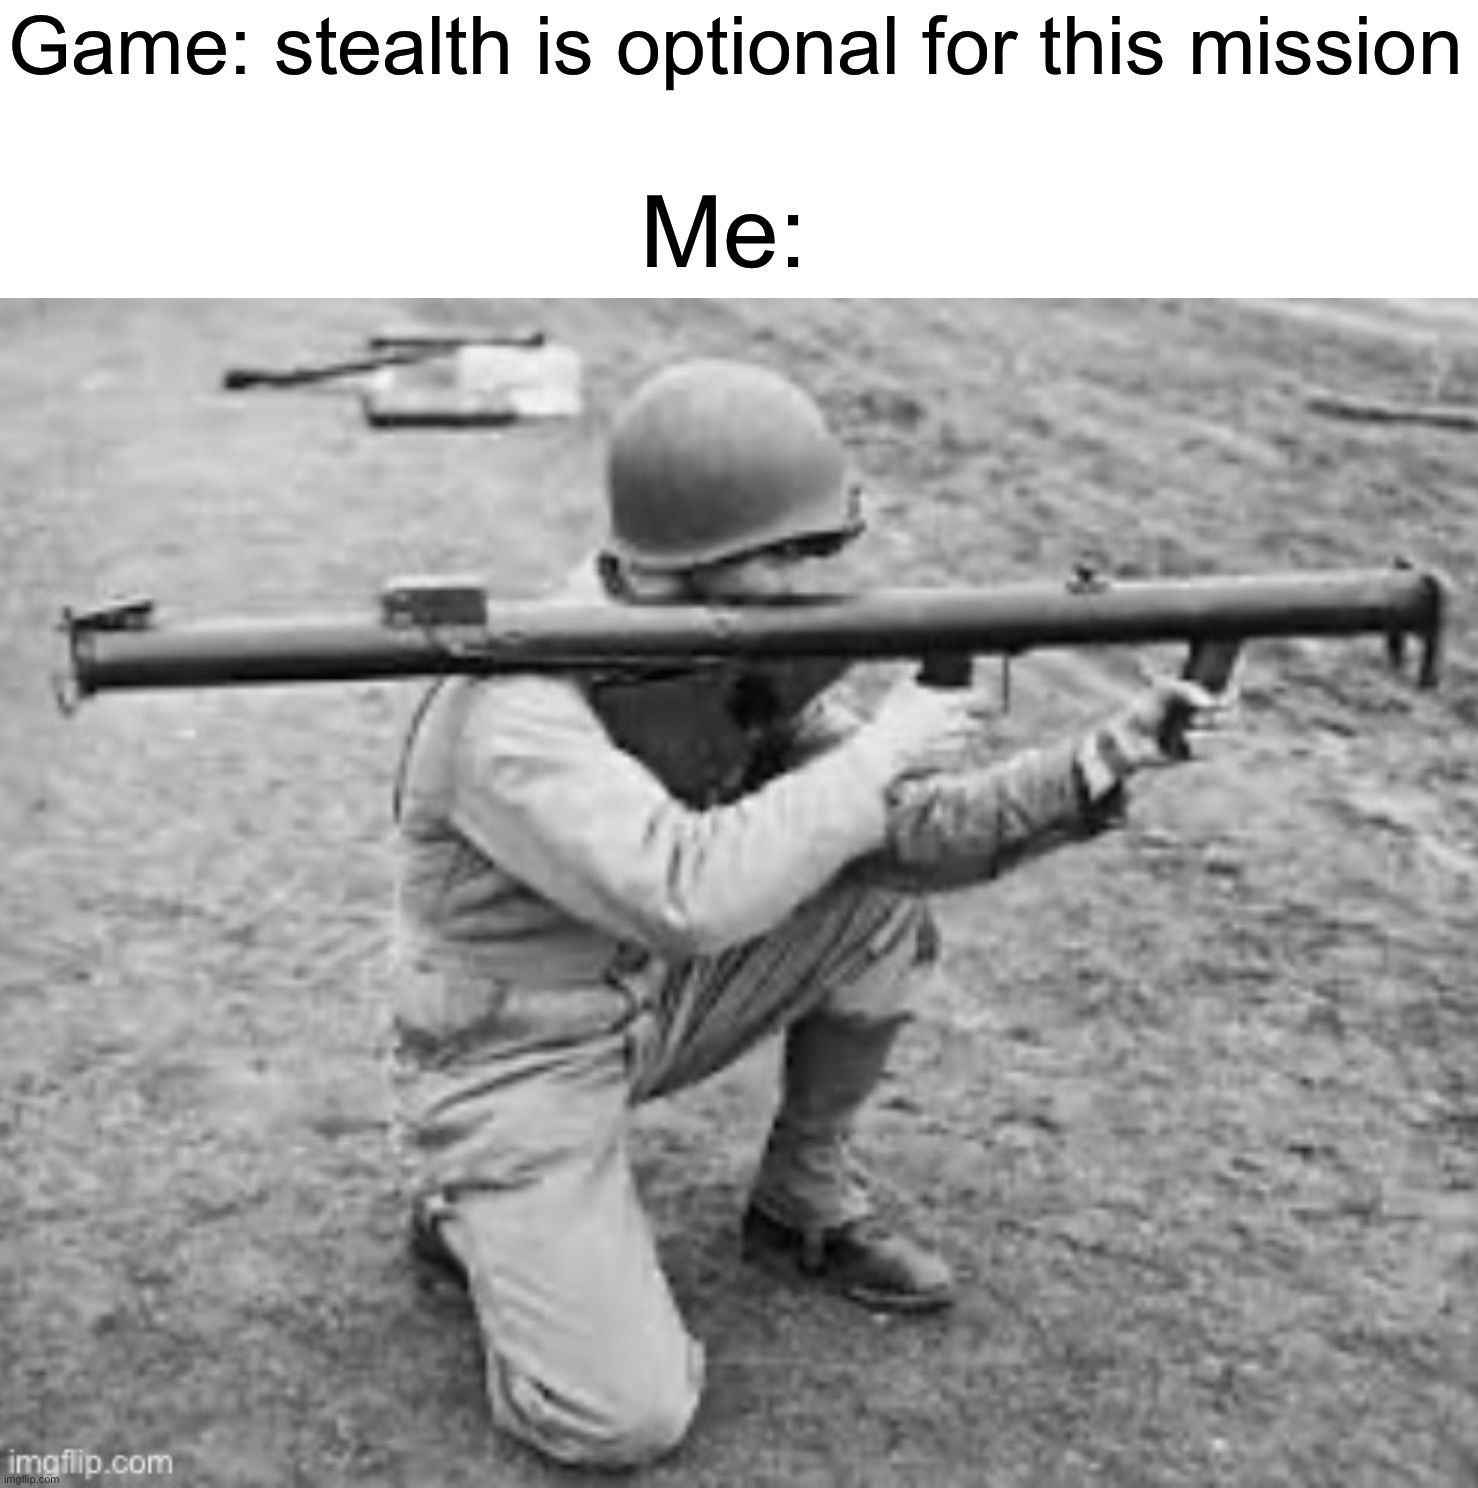 *boom* | Game: stealth is optional for this mission; Me: | image tagged in memes,funny,bazooka,gaming,oh crap,oh no | made w/ Imgflip meme maker